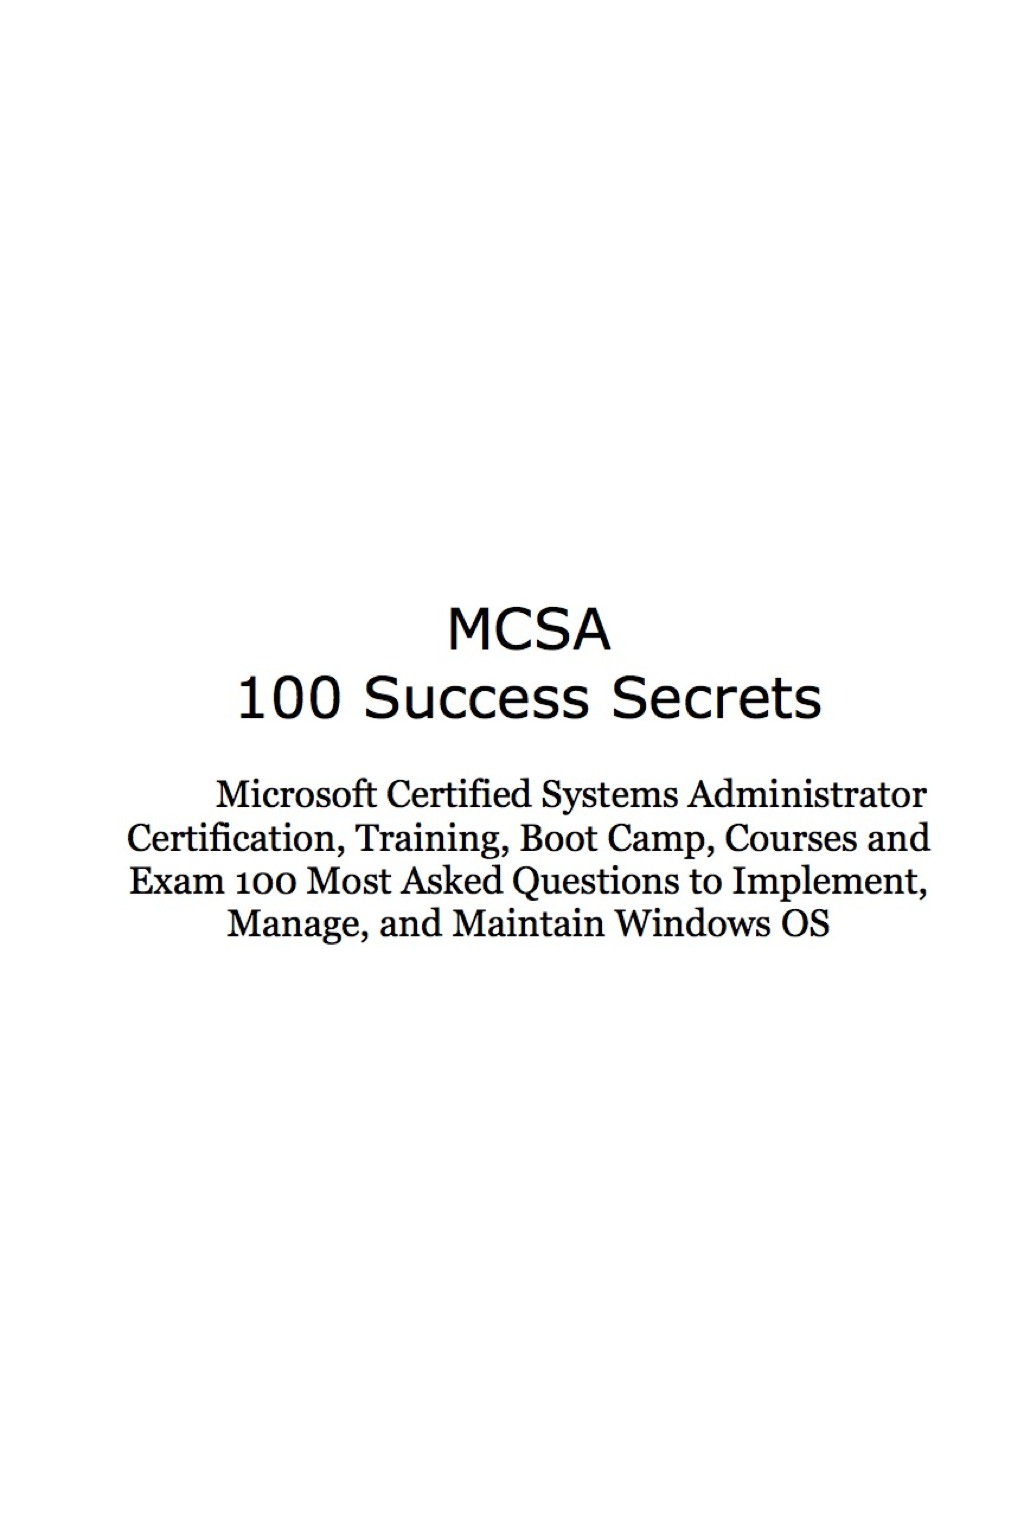 MCSA 100 Success Secrets Microsoft Certified Systems Administrator Certification  Training  Boot Camp  Courses and Exam 1 (eBook) - Jeff Willis,